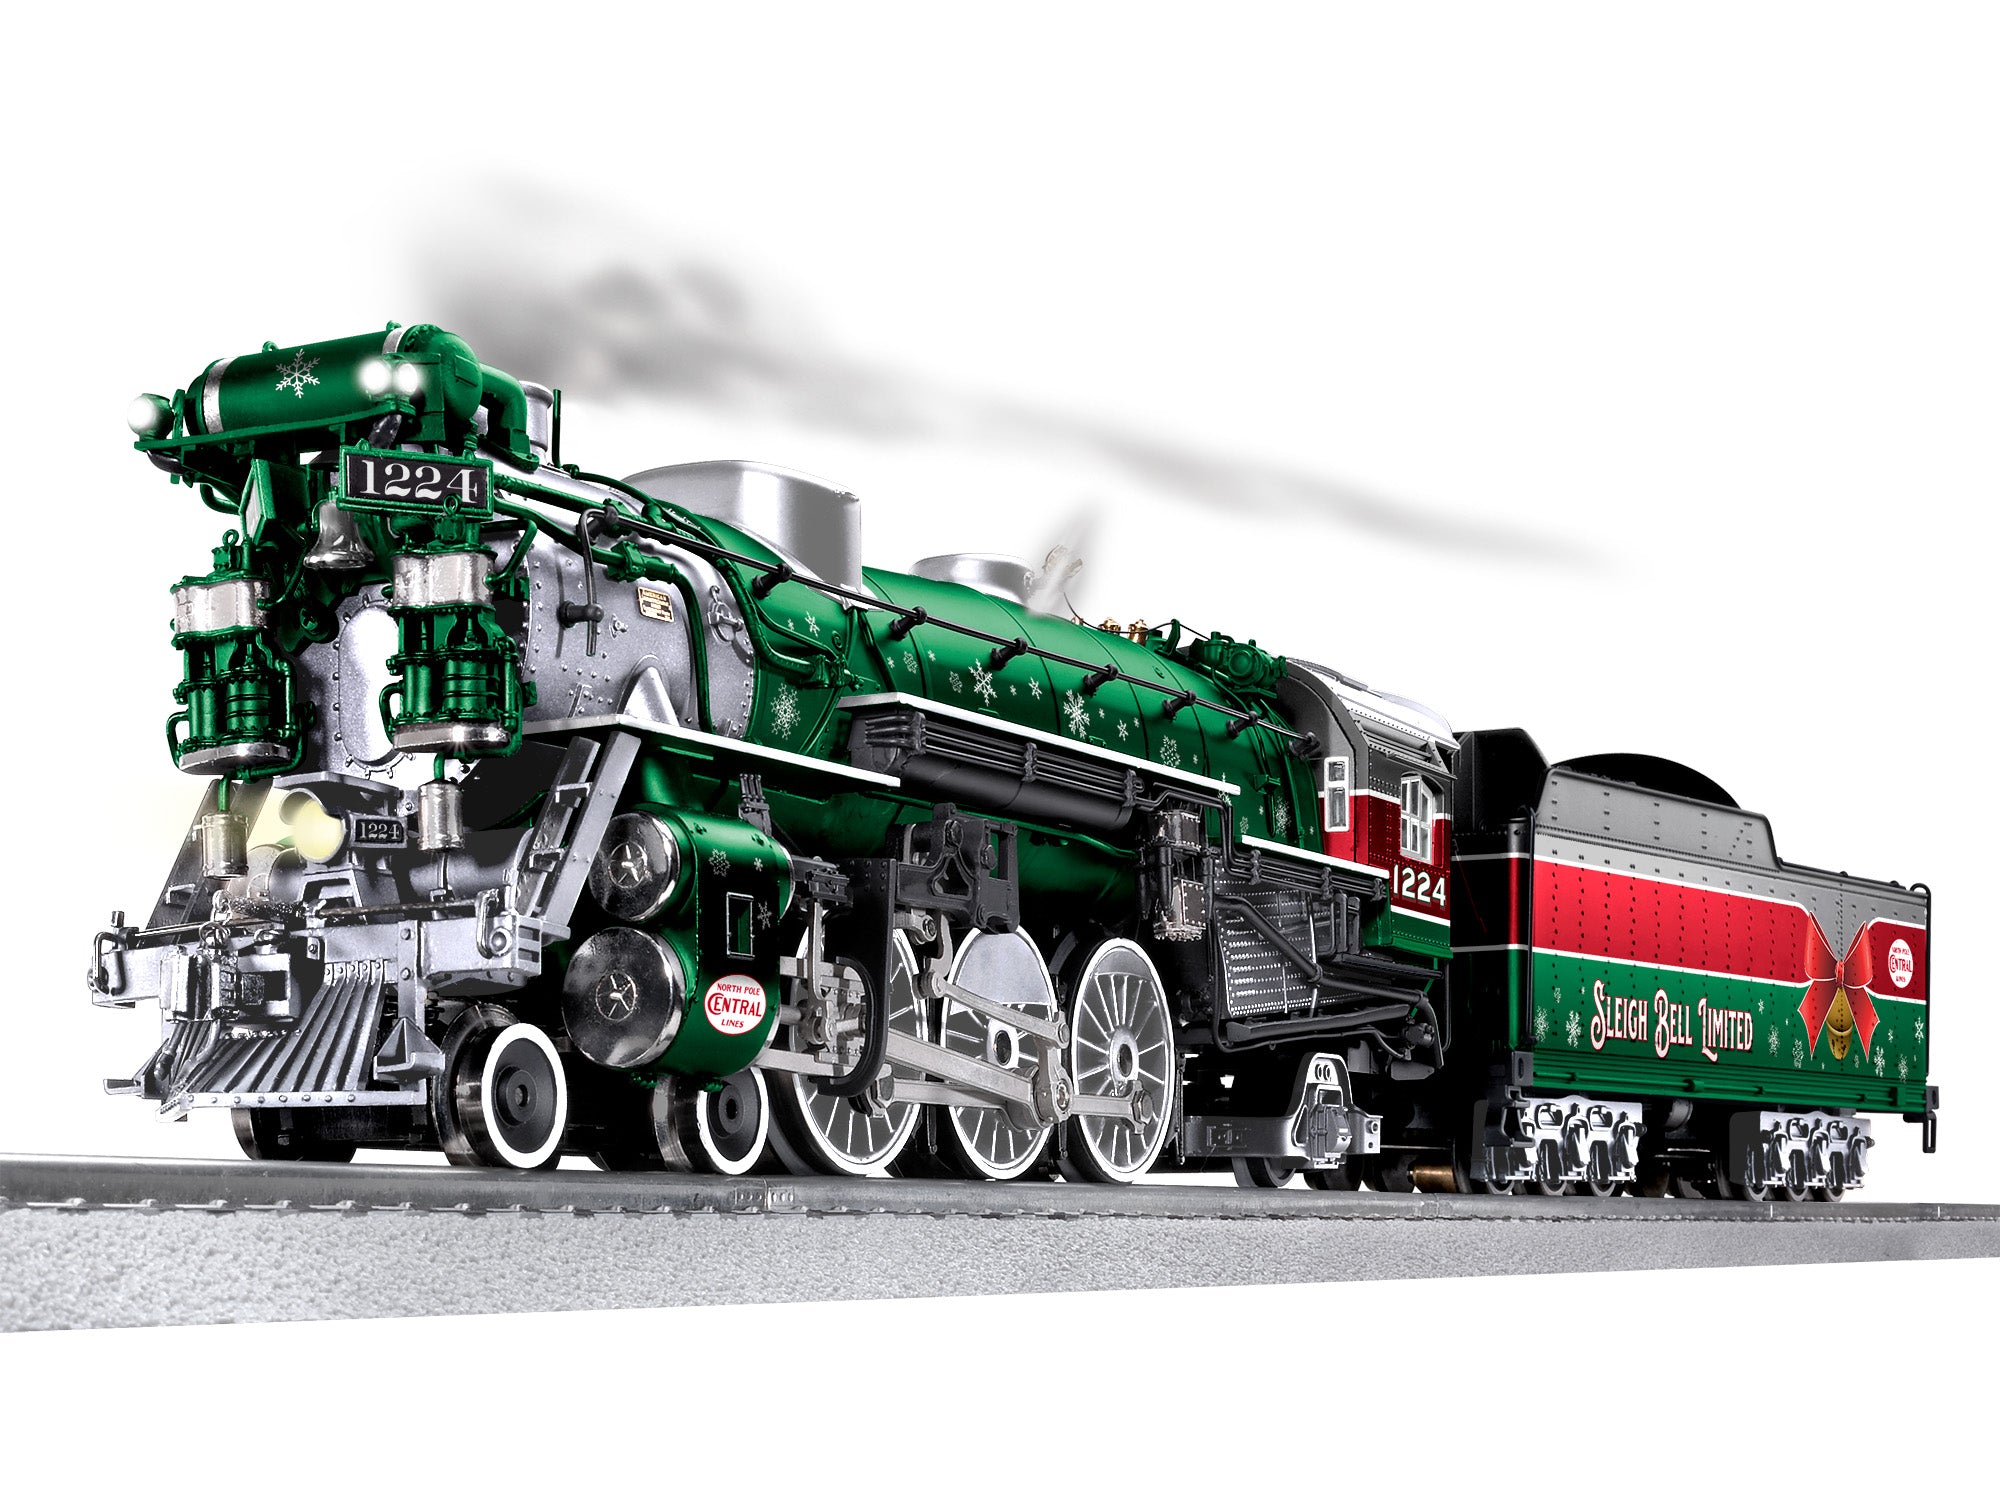 Lionel 2431620 - Legacy F19 Pacific Steam Engine "Christmas" #1224